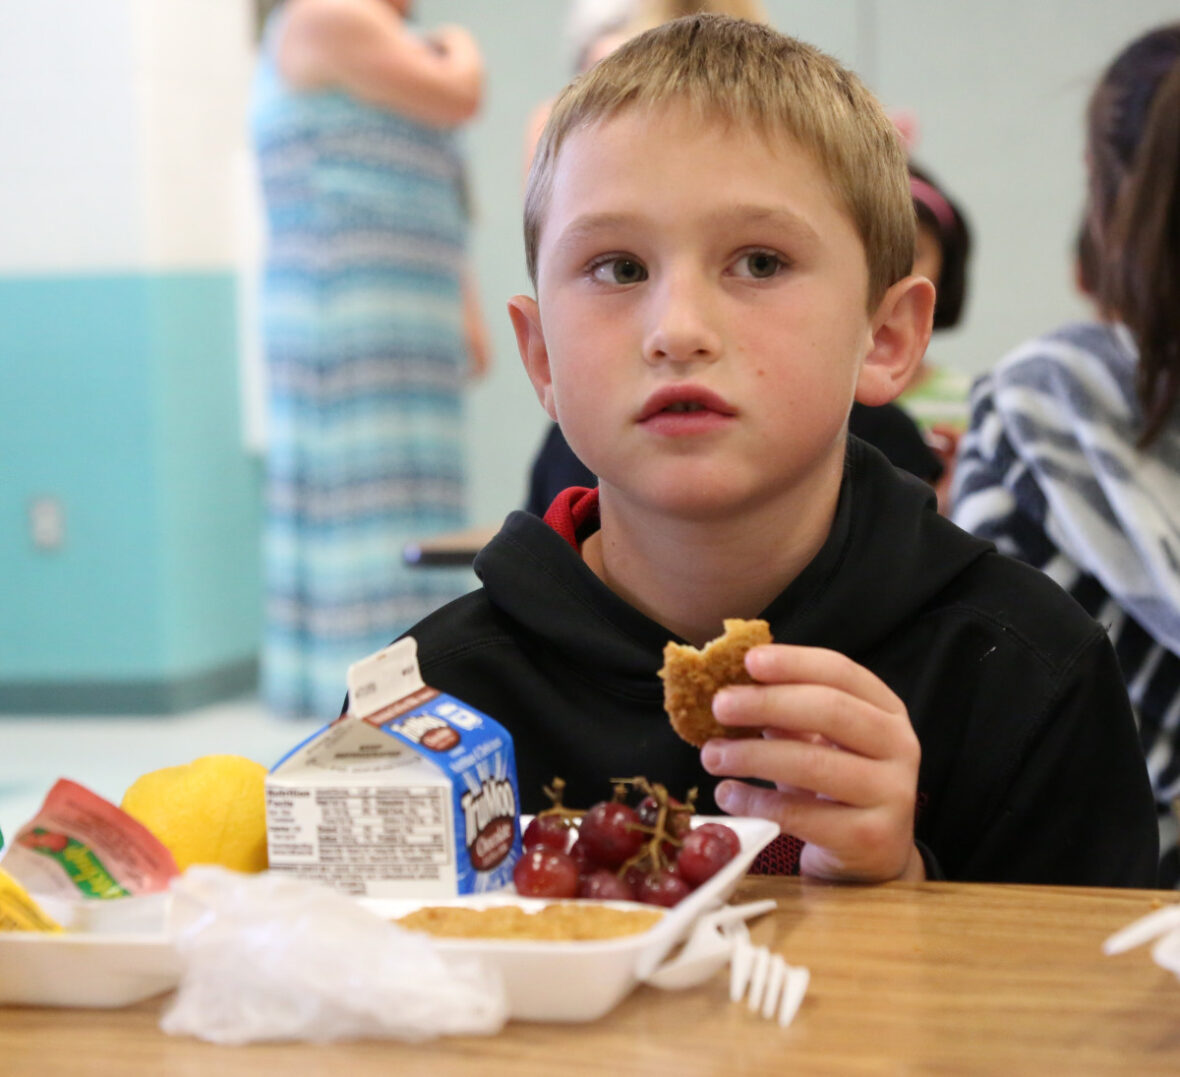 Free school lunch program expands